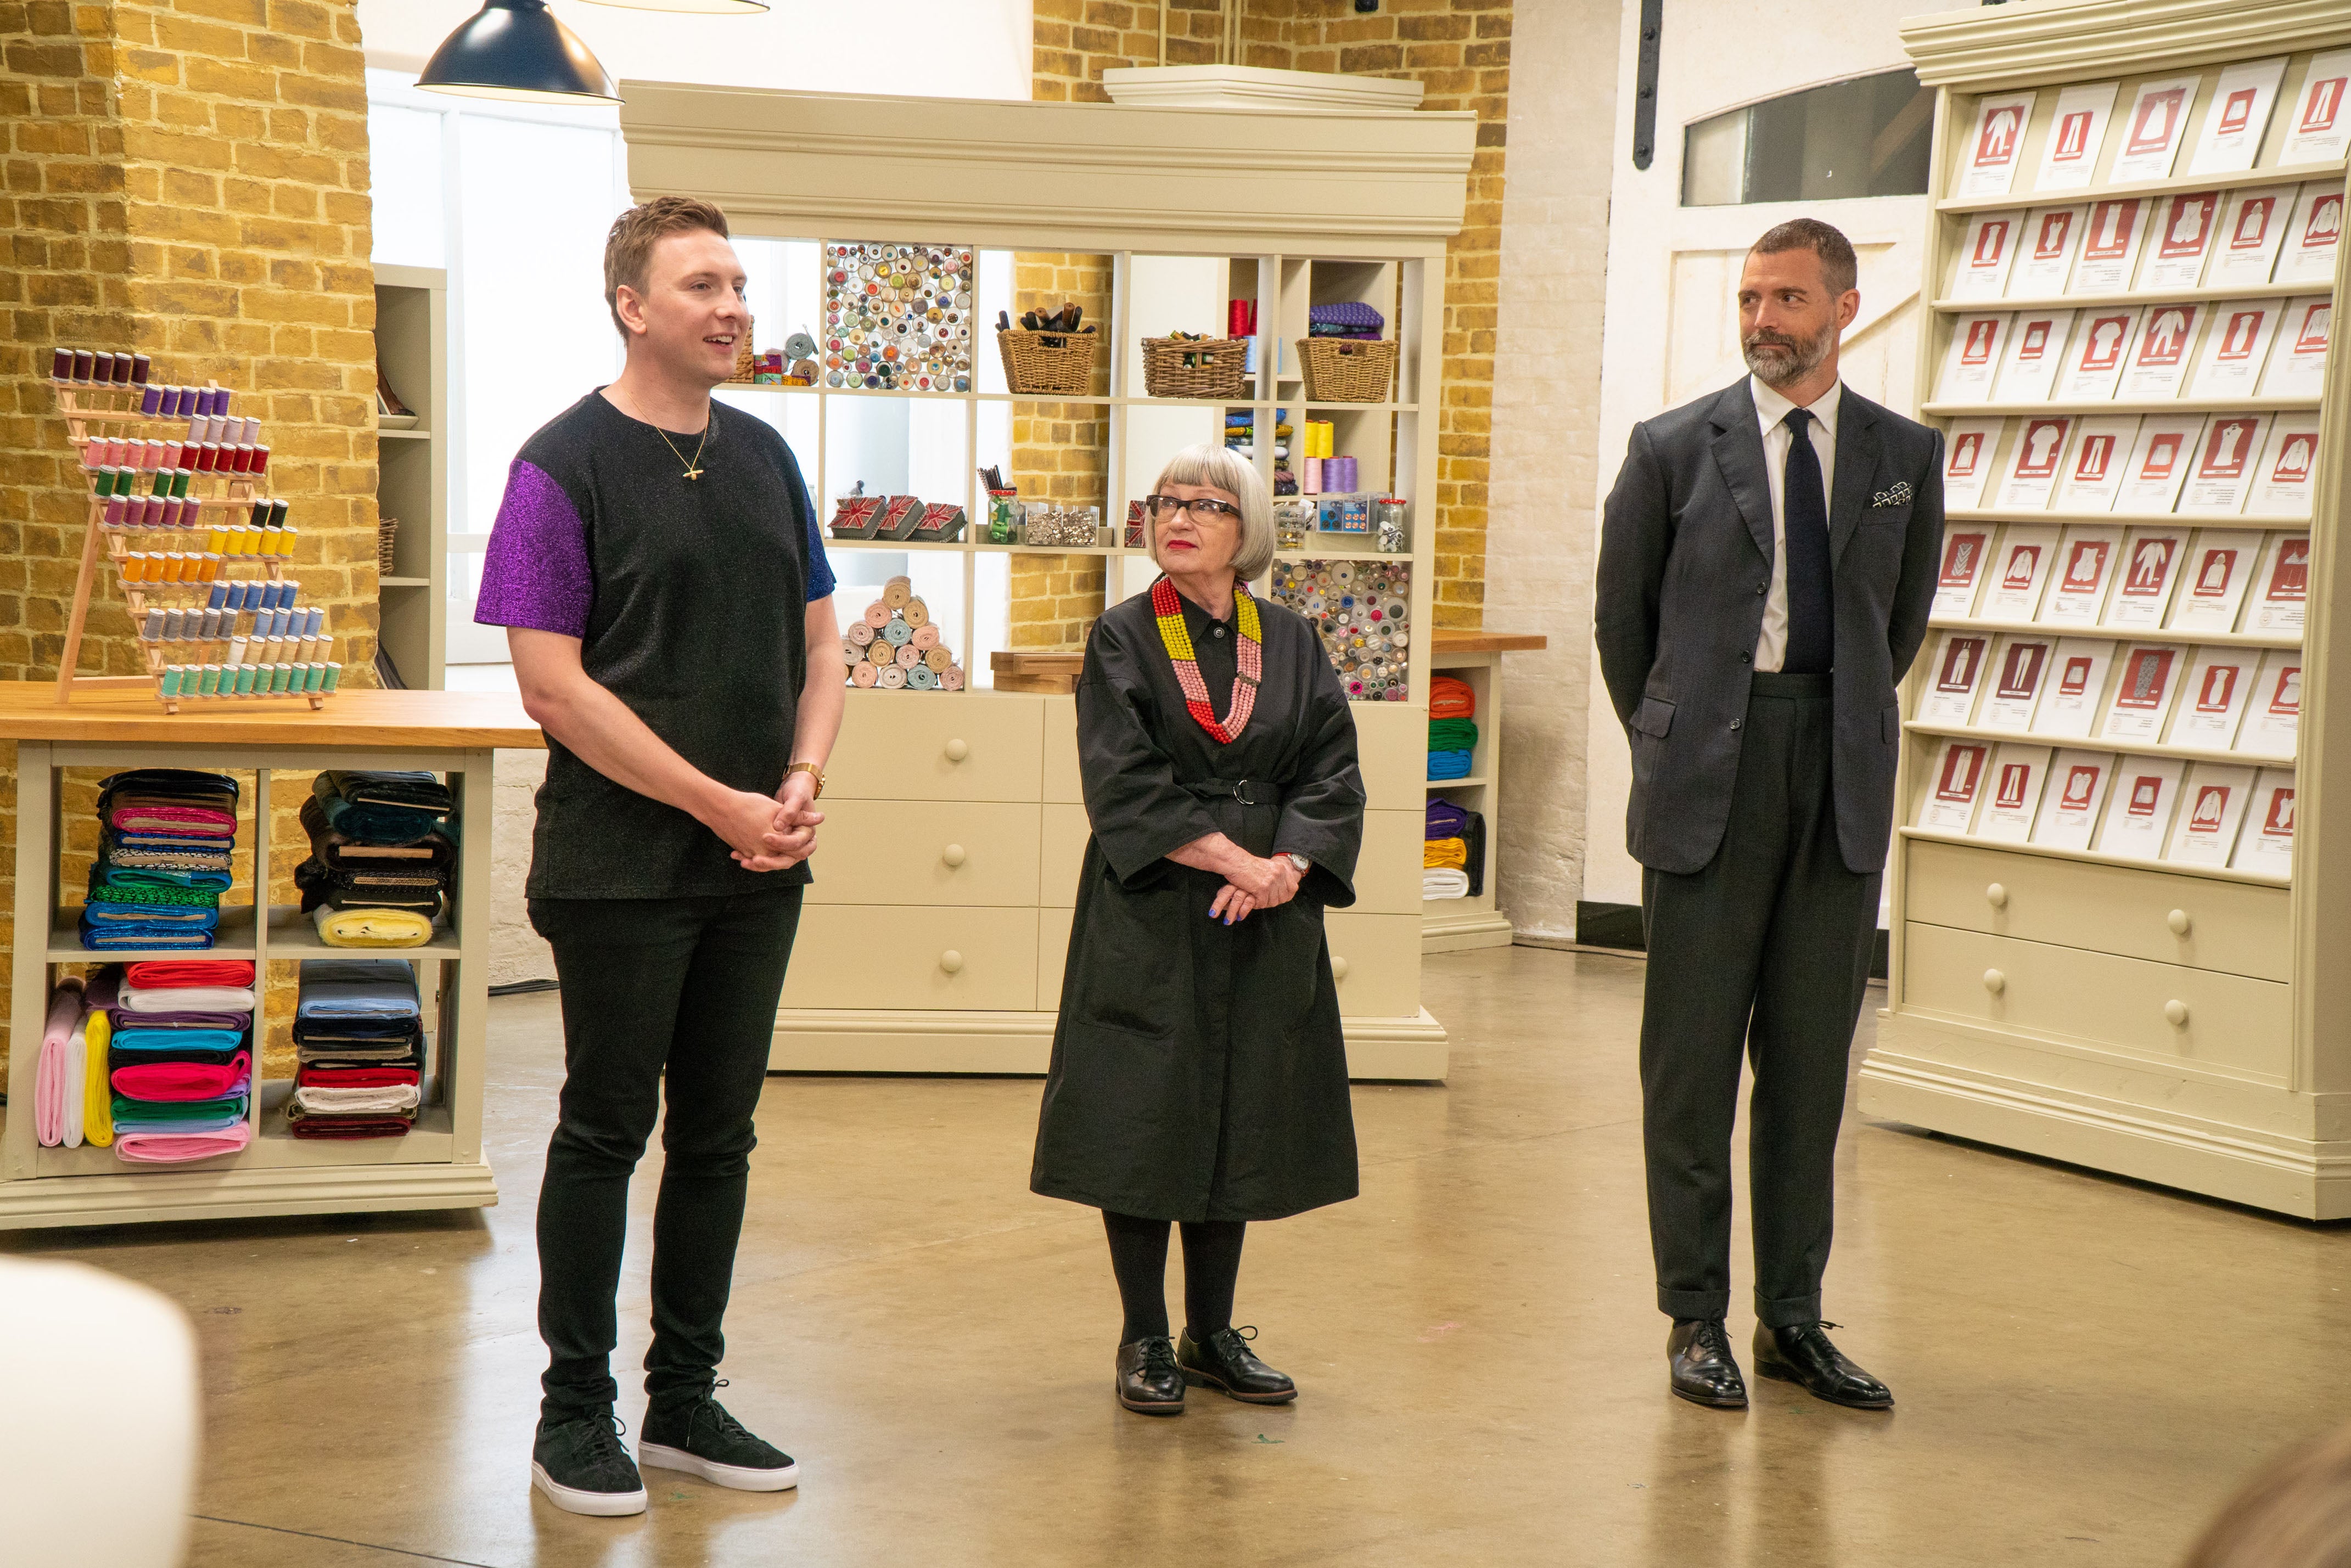 WARNING: Embargoed for publication until 00:00:01 on 06/04/2021 - Programme Name: The Great British Sewing Bee S7 - TX: n/a - Episode: The Great British Sewing Bee S7 - Ep1 (No. 1) - Picture Shows: **STRICTLY EMBARGOED NOT FOR PUBLICATION BEFORE 00:01 HRS ON TUESDAY 6TH APRIL 2021** Joe Lycett, Esme Young, Patrick Grant - (C) Love Productions - Photographer: Mark Bourdillon